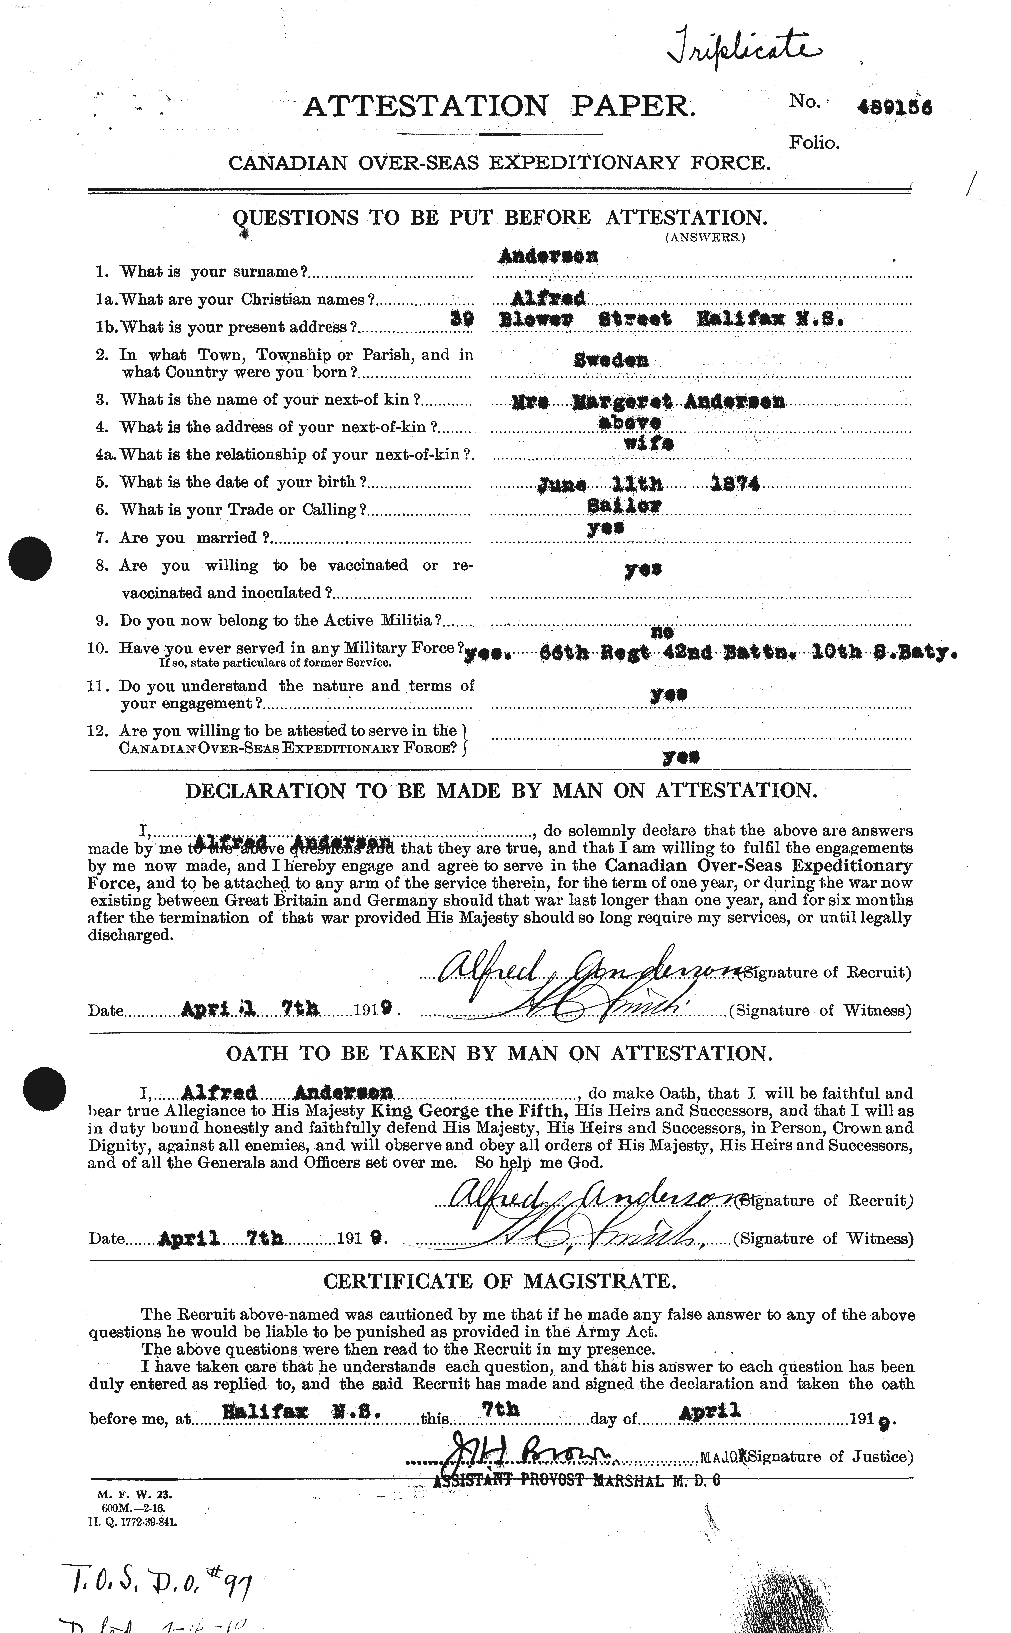 Personnel Records of the First World War - CEF 209459a